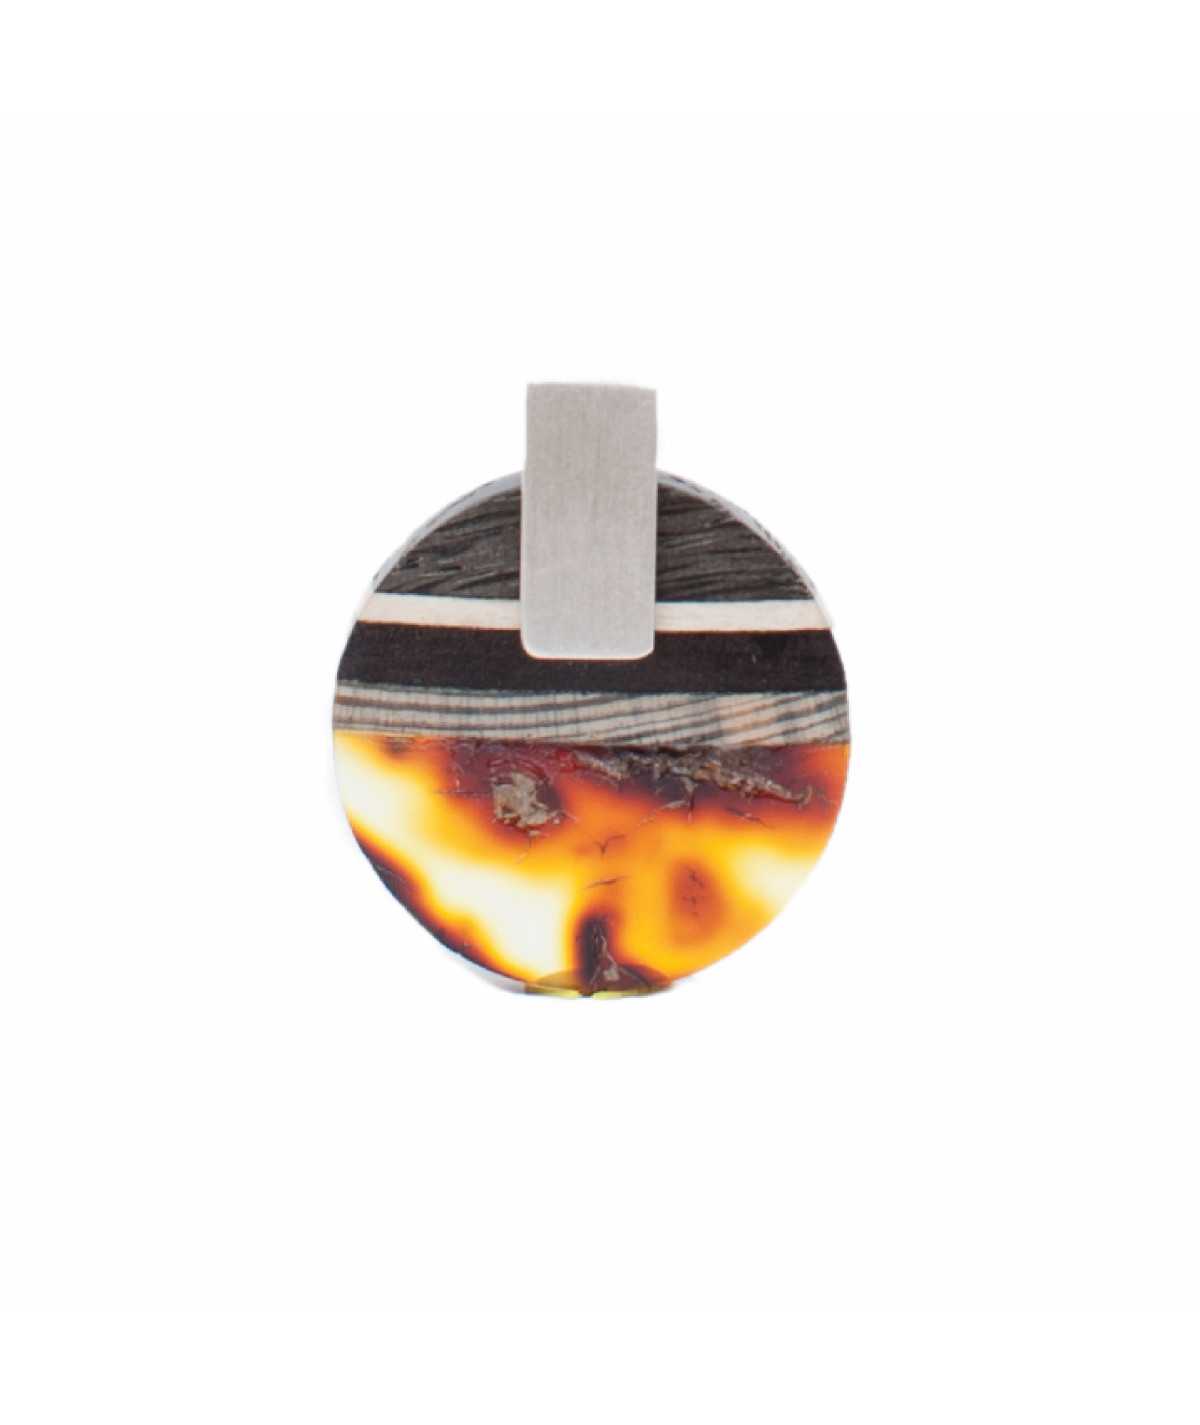 Pendant made of amber and wood on silver.